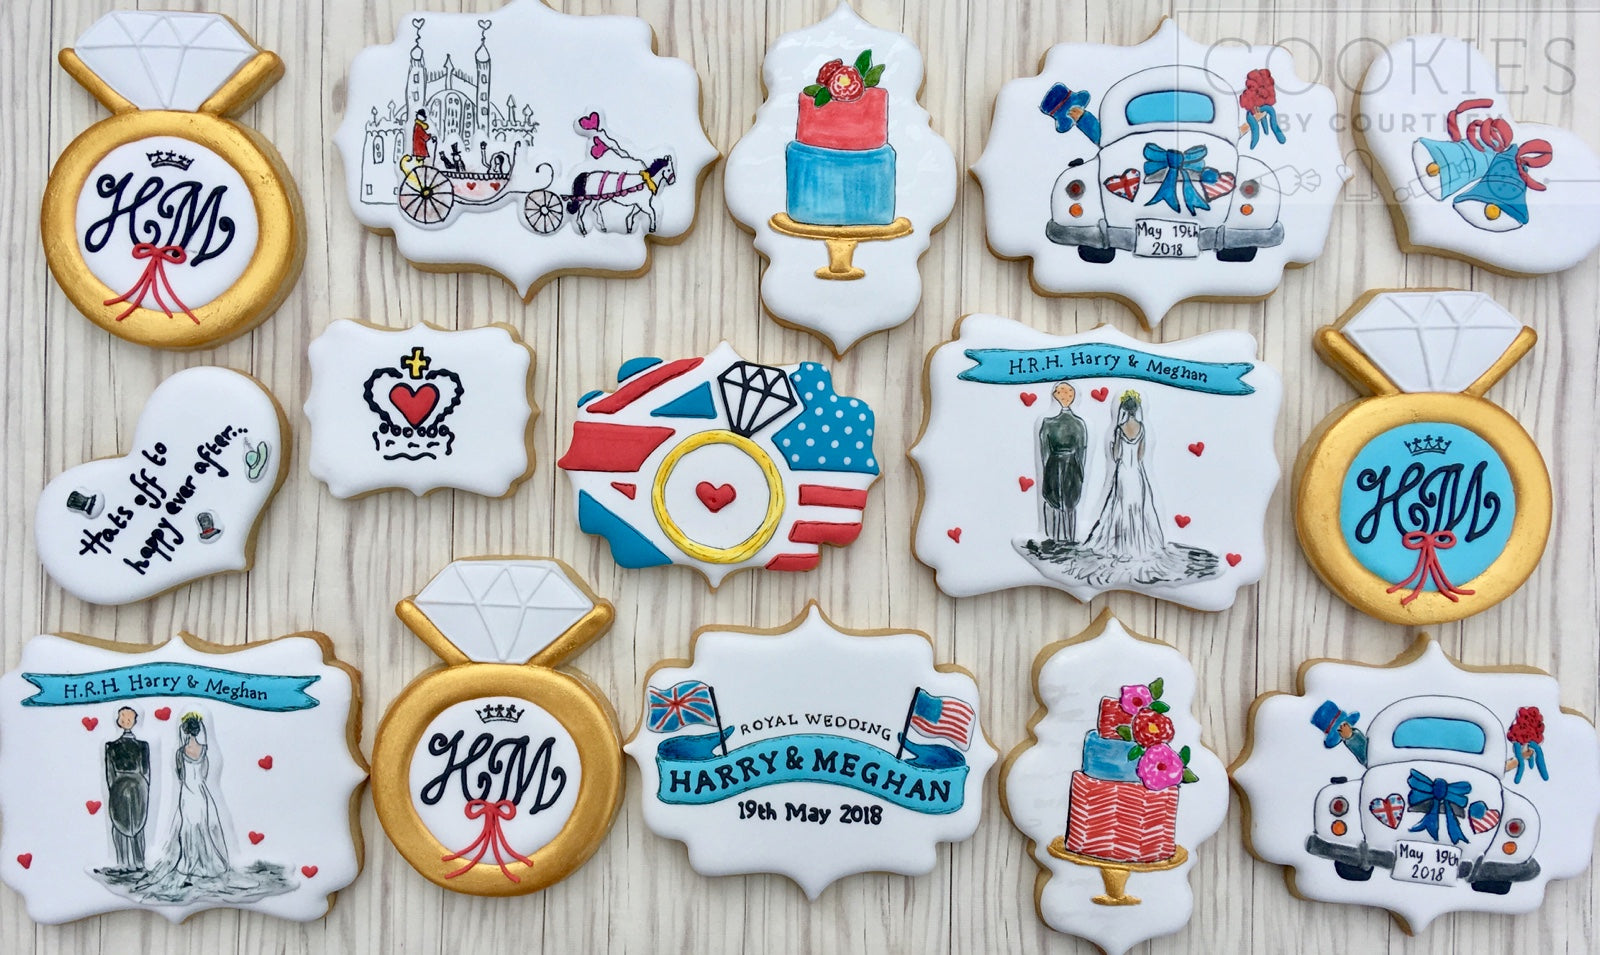 Celebrating the Royal Wedding with Cookies for Harry and Meghan